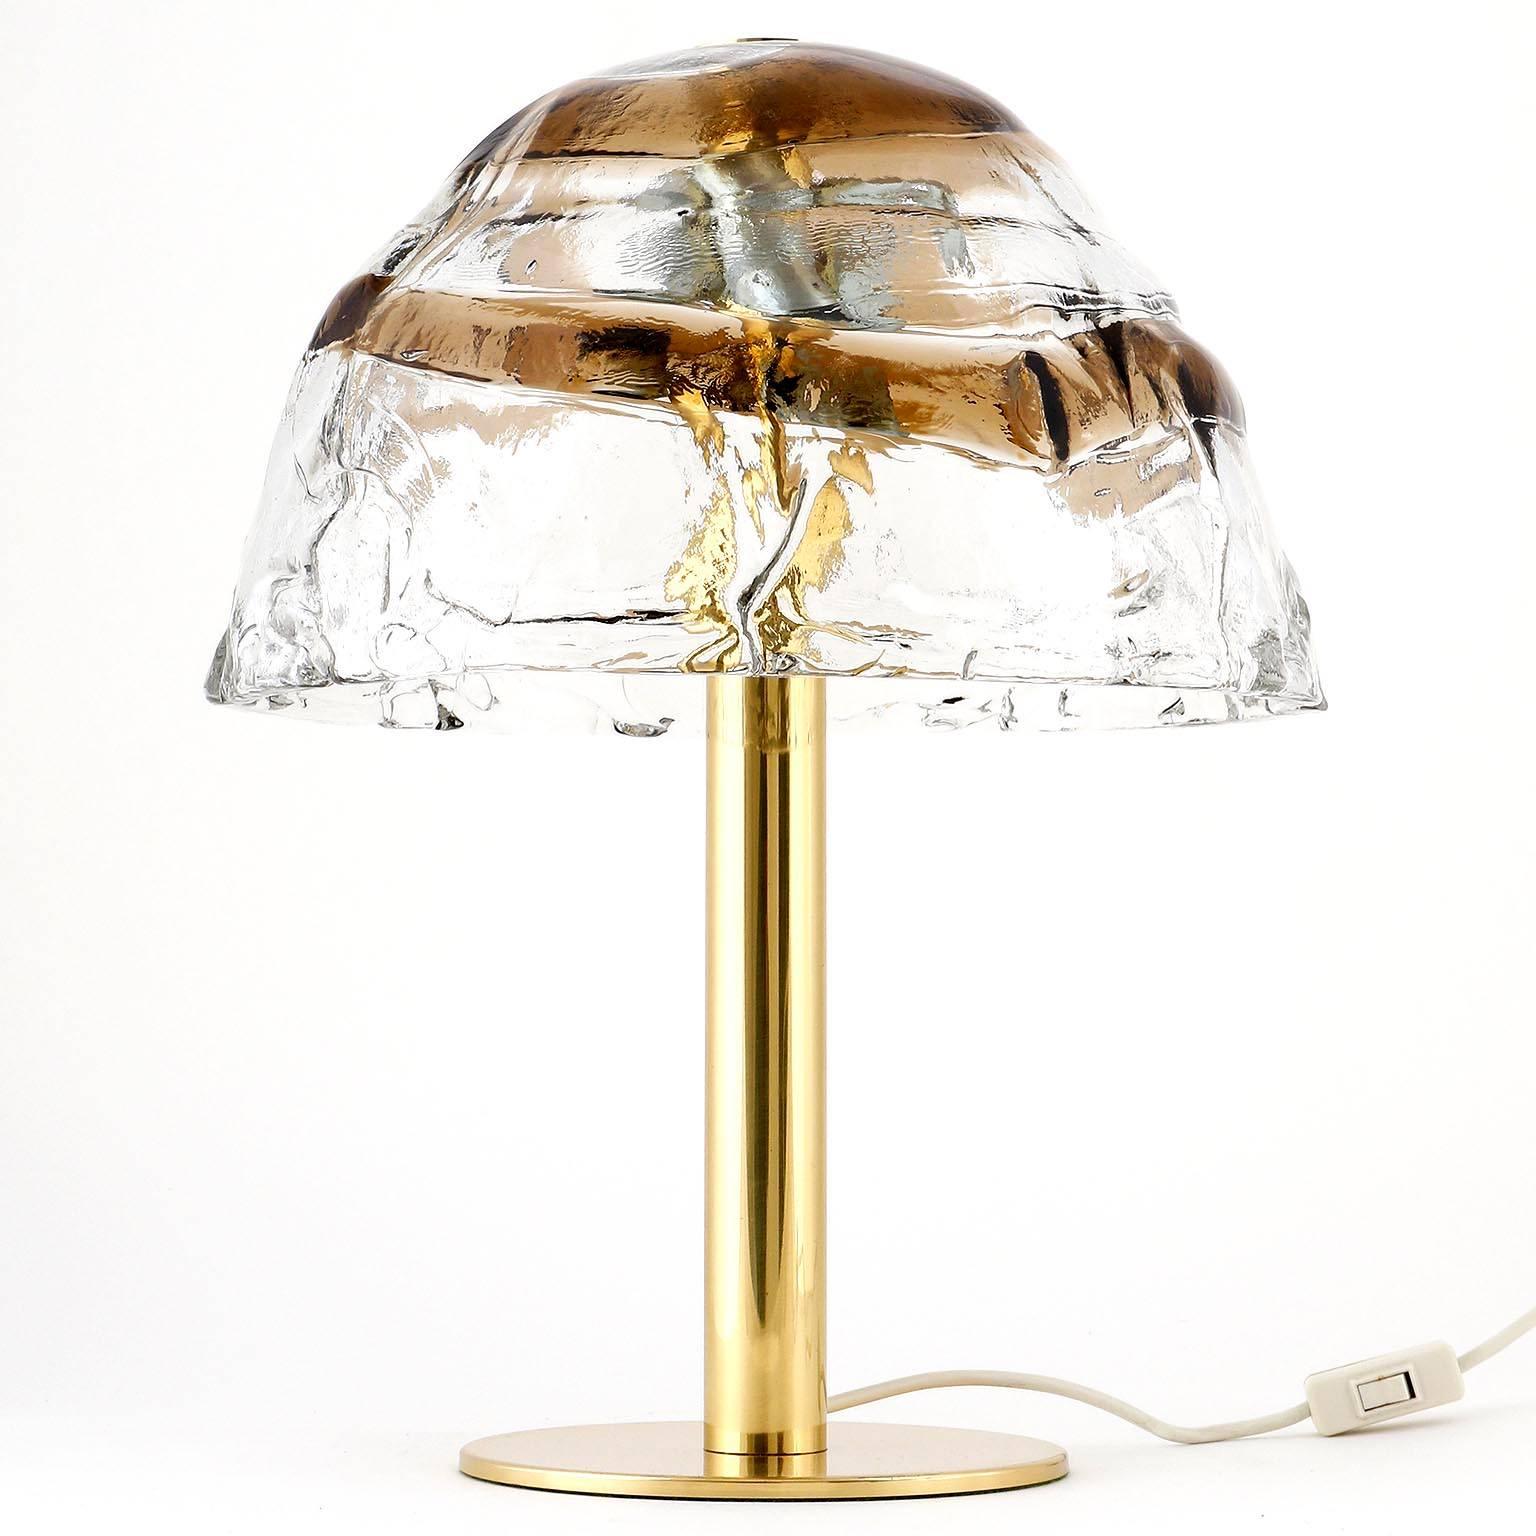 A pair of table lights model 'Dom' by J.T. Kalmar, Austria, manufactured in midcentury, circa 1970 (late 1960s or early 1970s). 
A large lamp shade made of clear and smoked or brown Murano glass is held by a polished brass stand. A nice and large